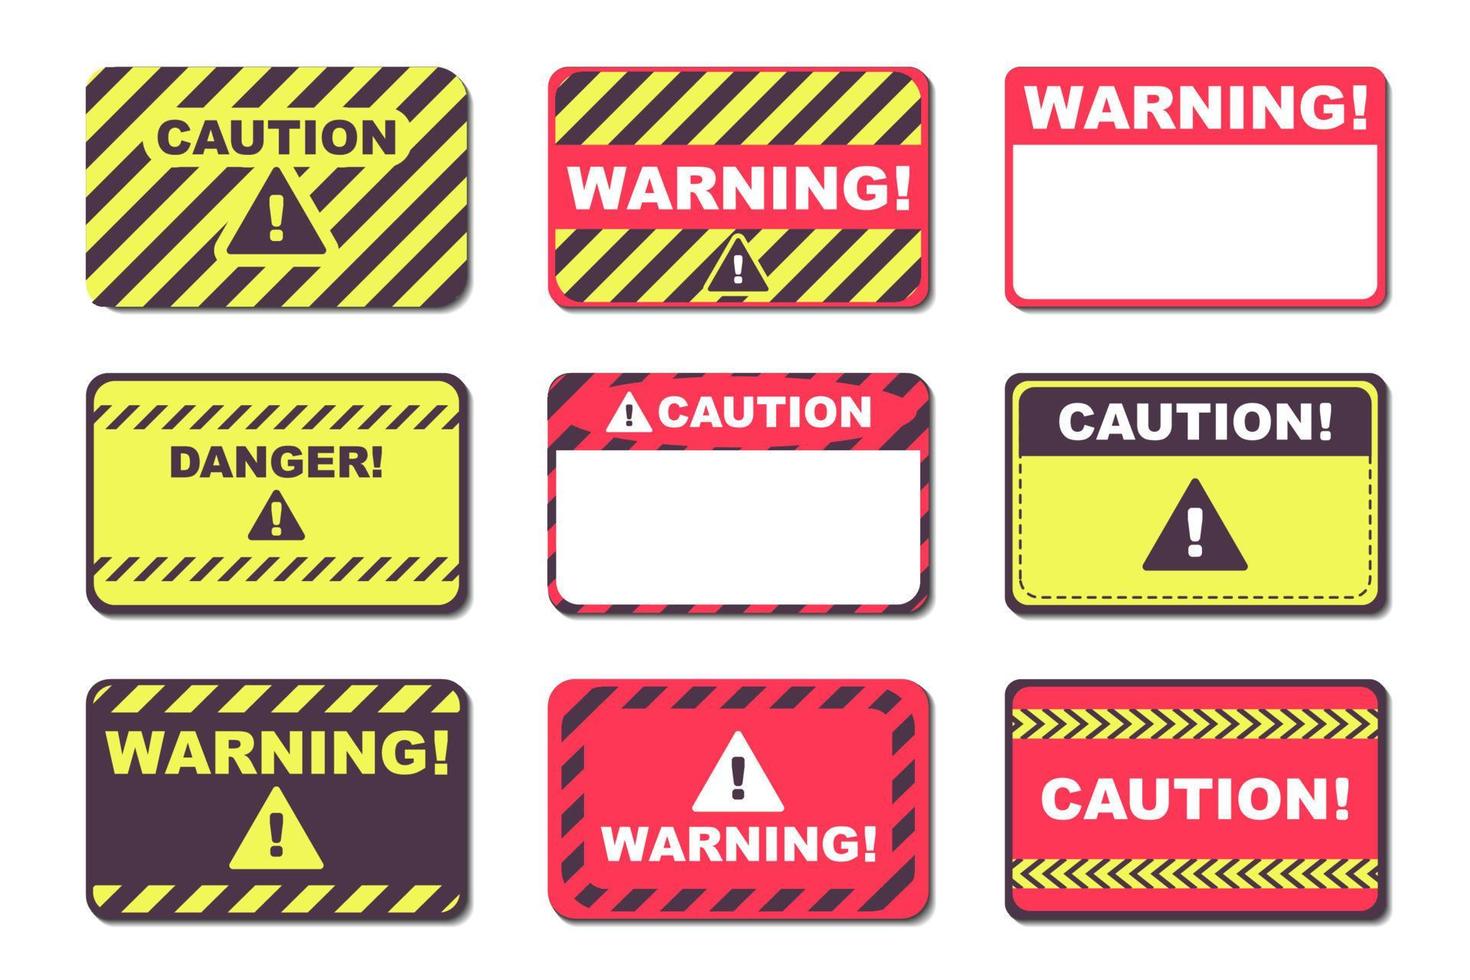 Minimalist Collection of Blank Warning and Caution Sticker Design Template Set vector